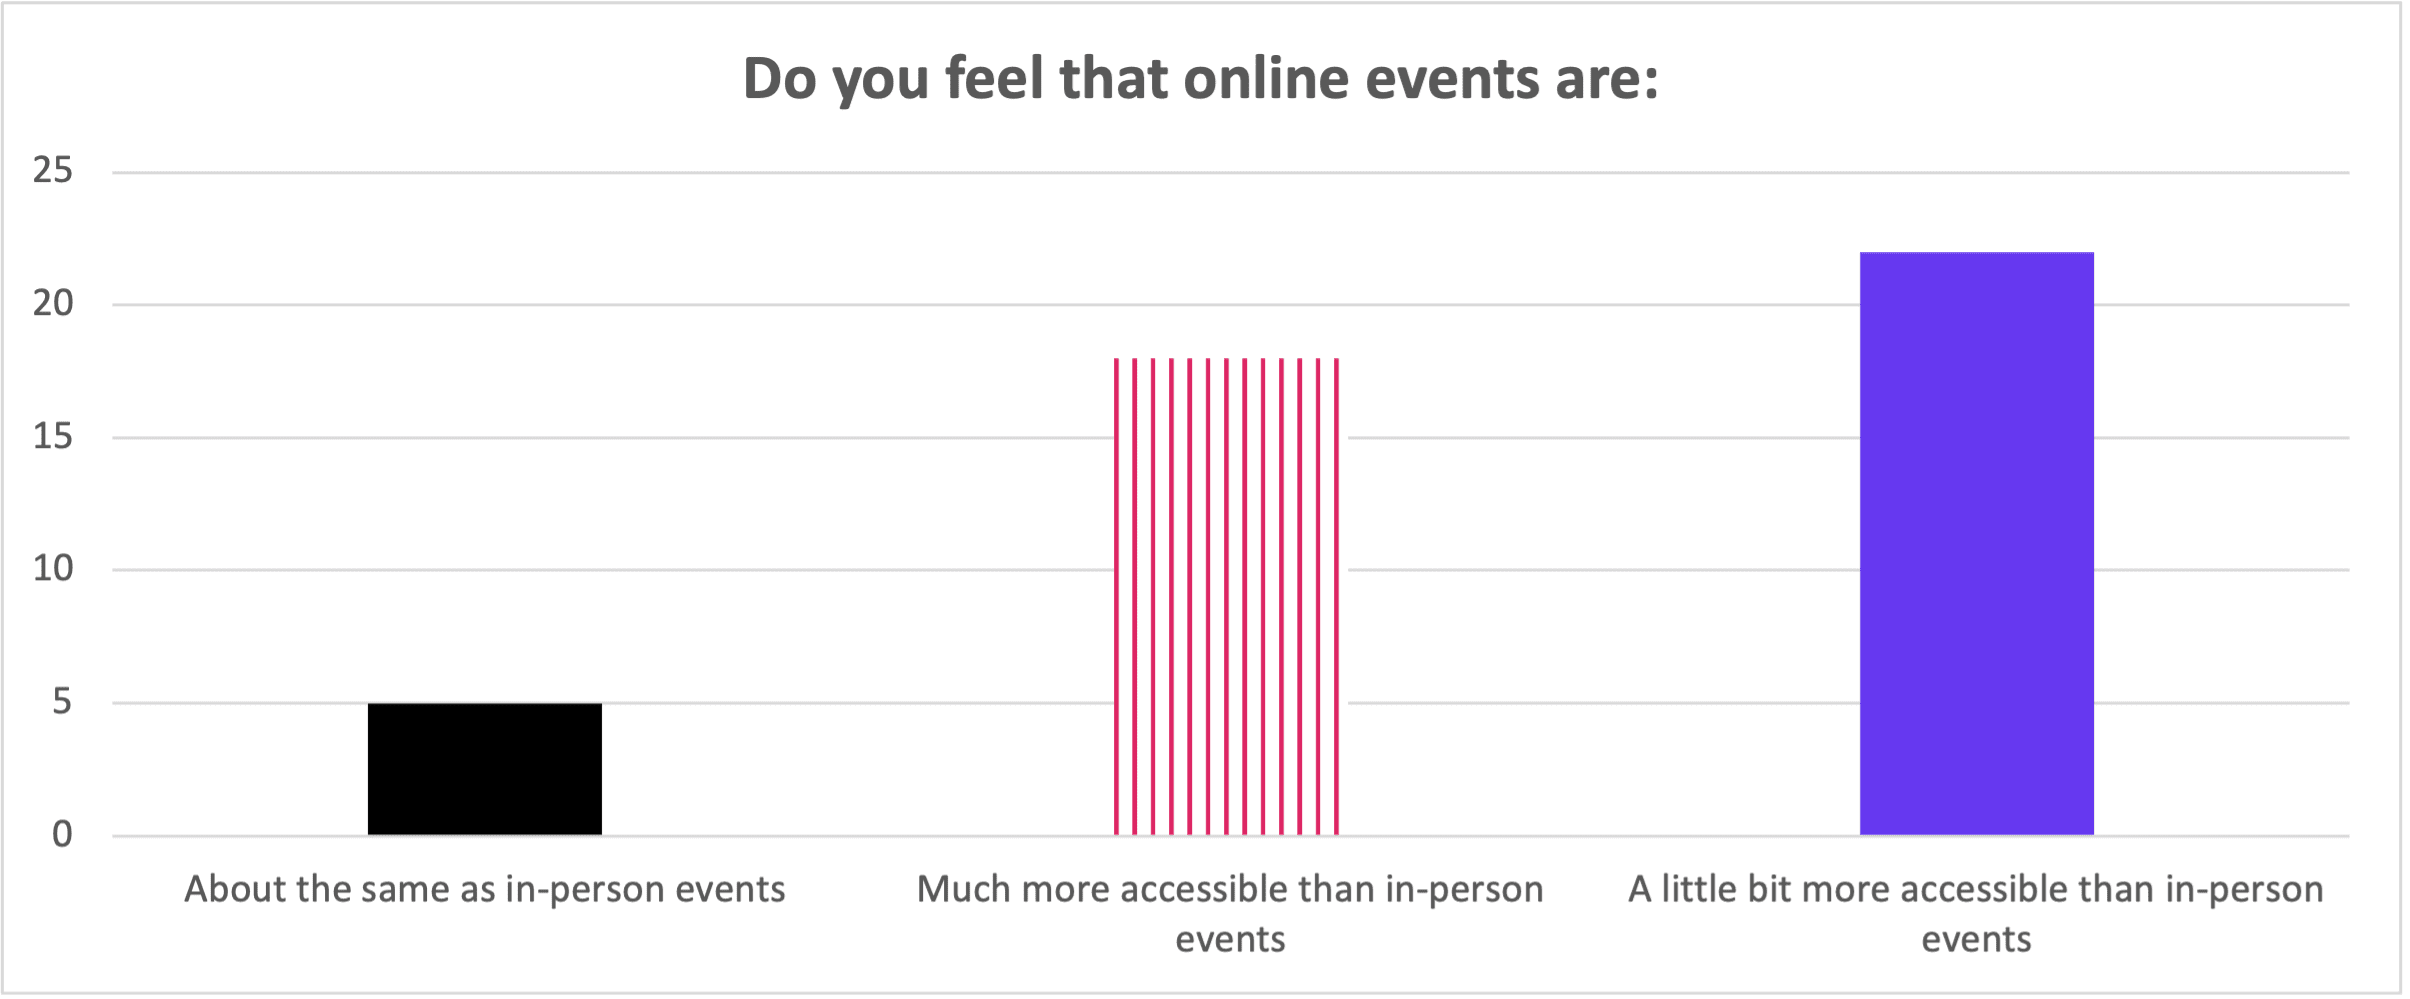 A chart showing that a majority of participants find online events a bit more accessible and nearly another 40% find them much more accessible